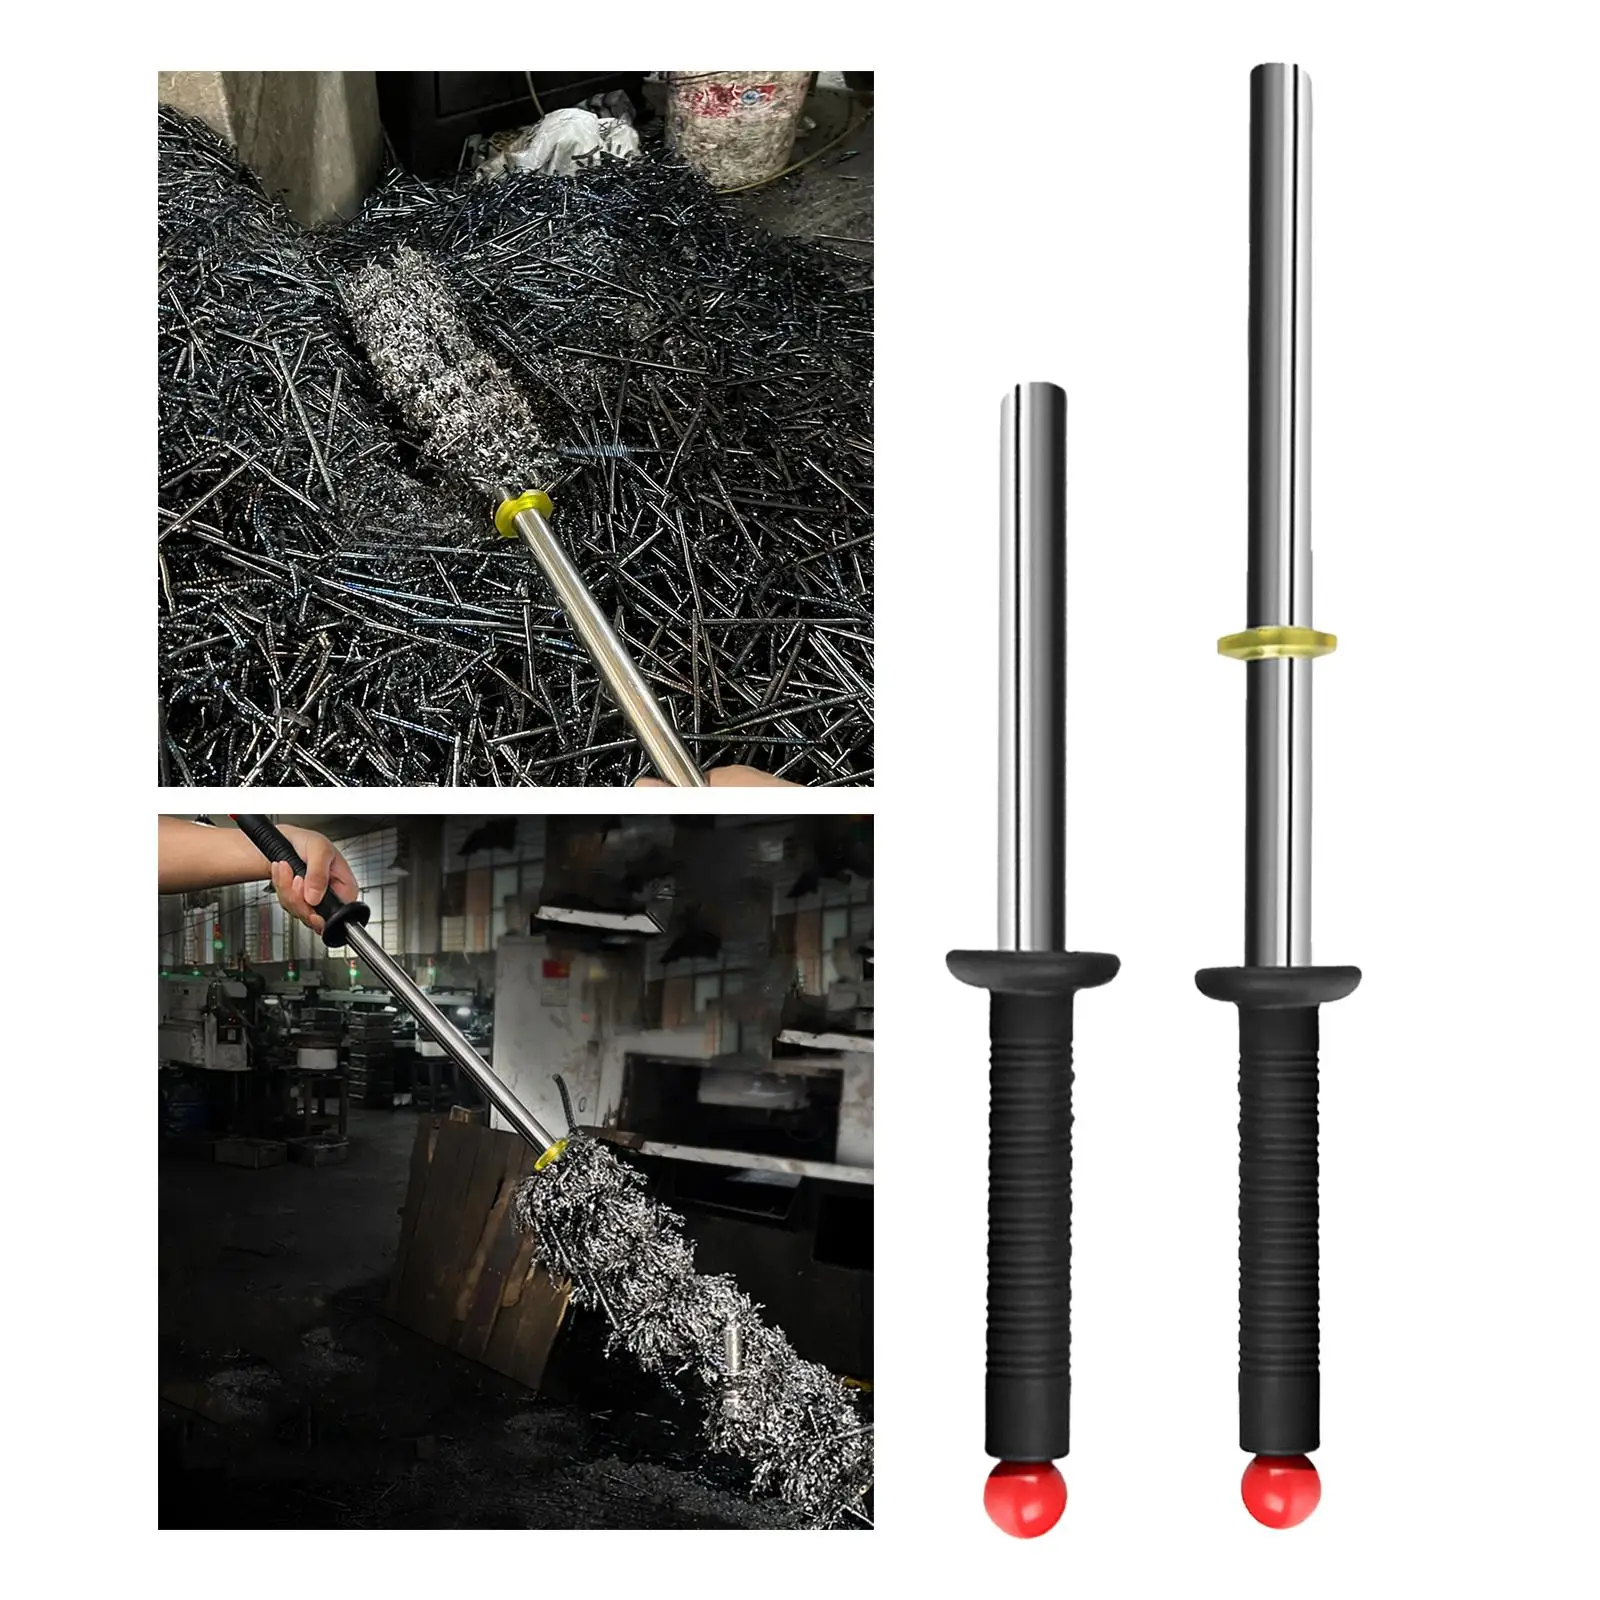 Magnetic Swarf Collector Cleanup Tools Pick up Rod Pickup Tool Grabber for Warehouse Workshop Shavings Metallic Objects Screws